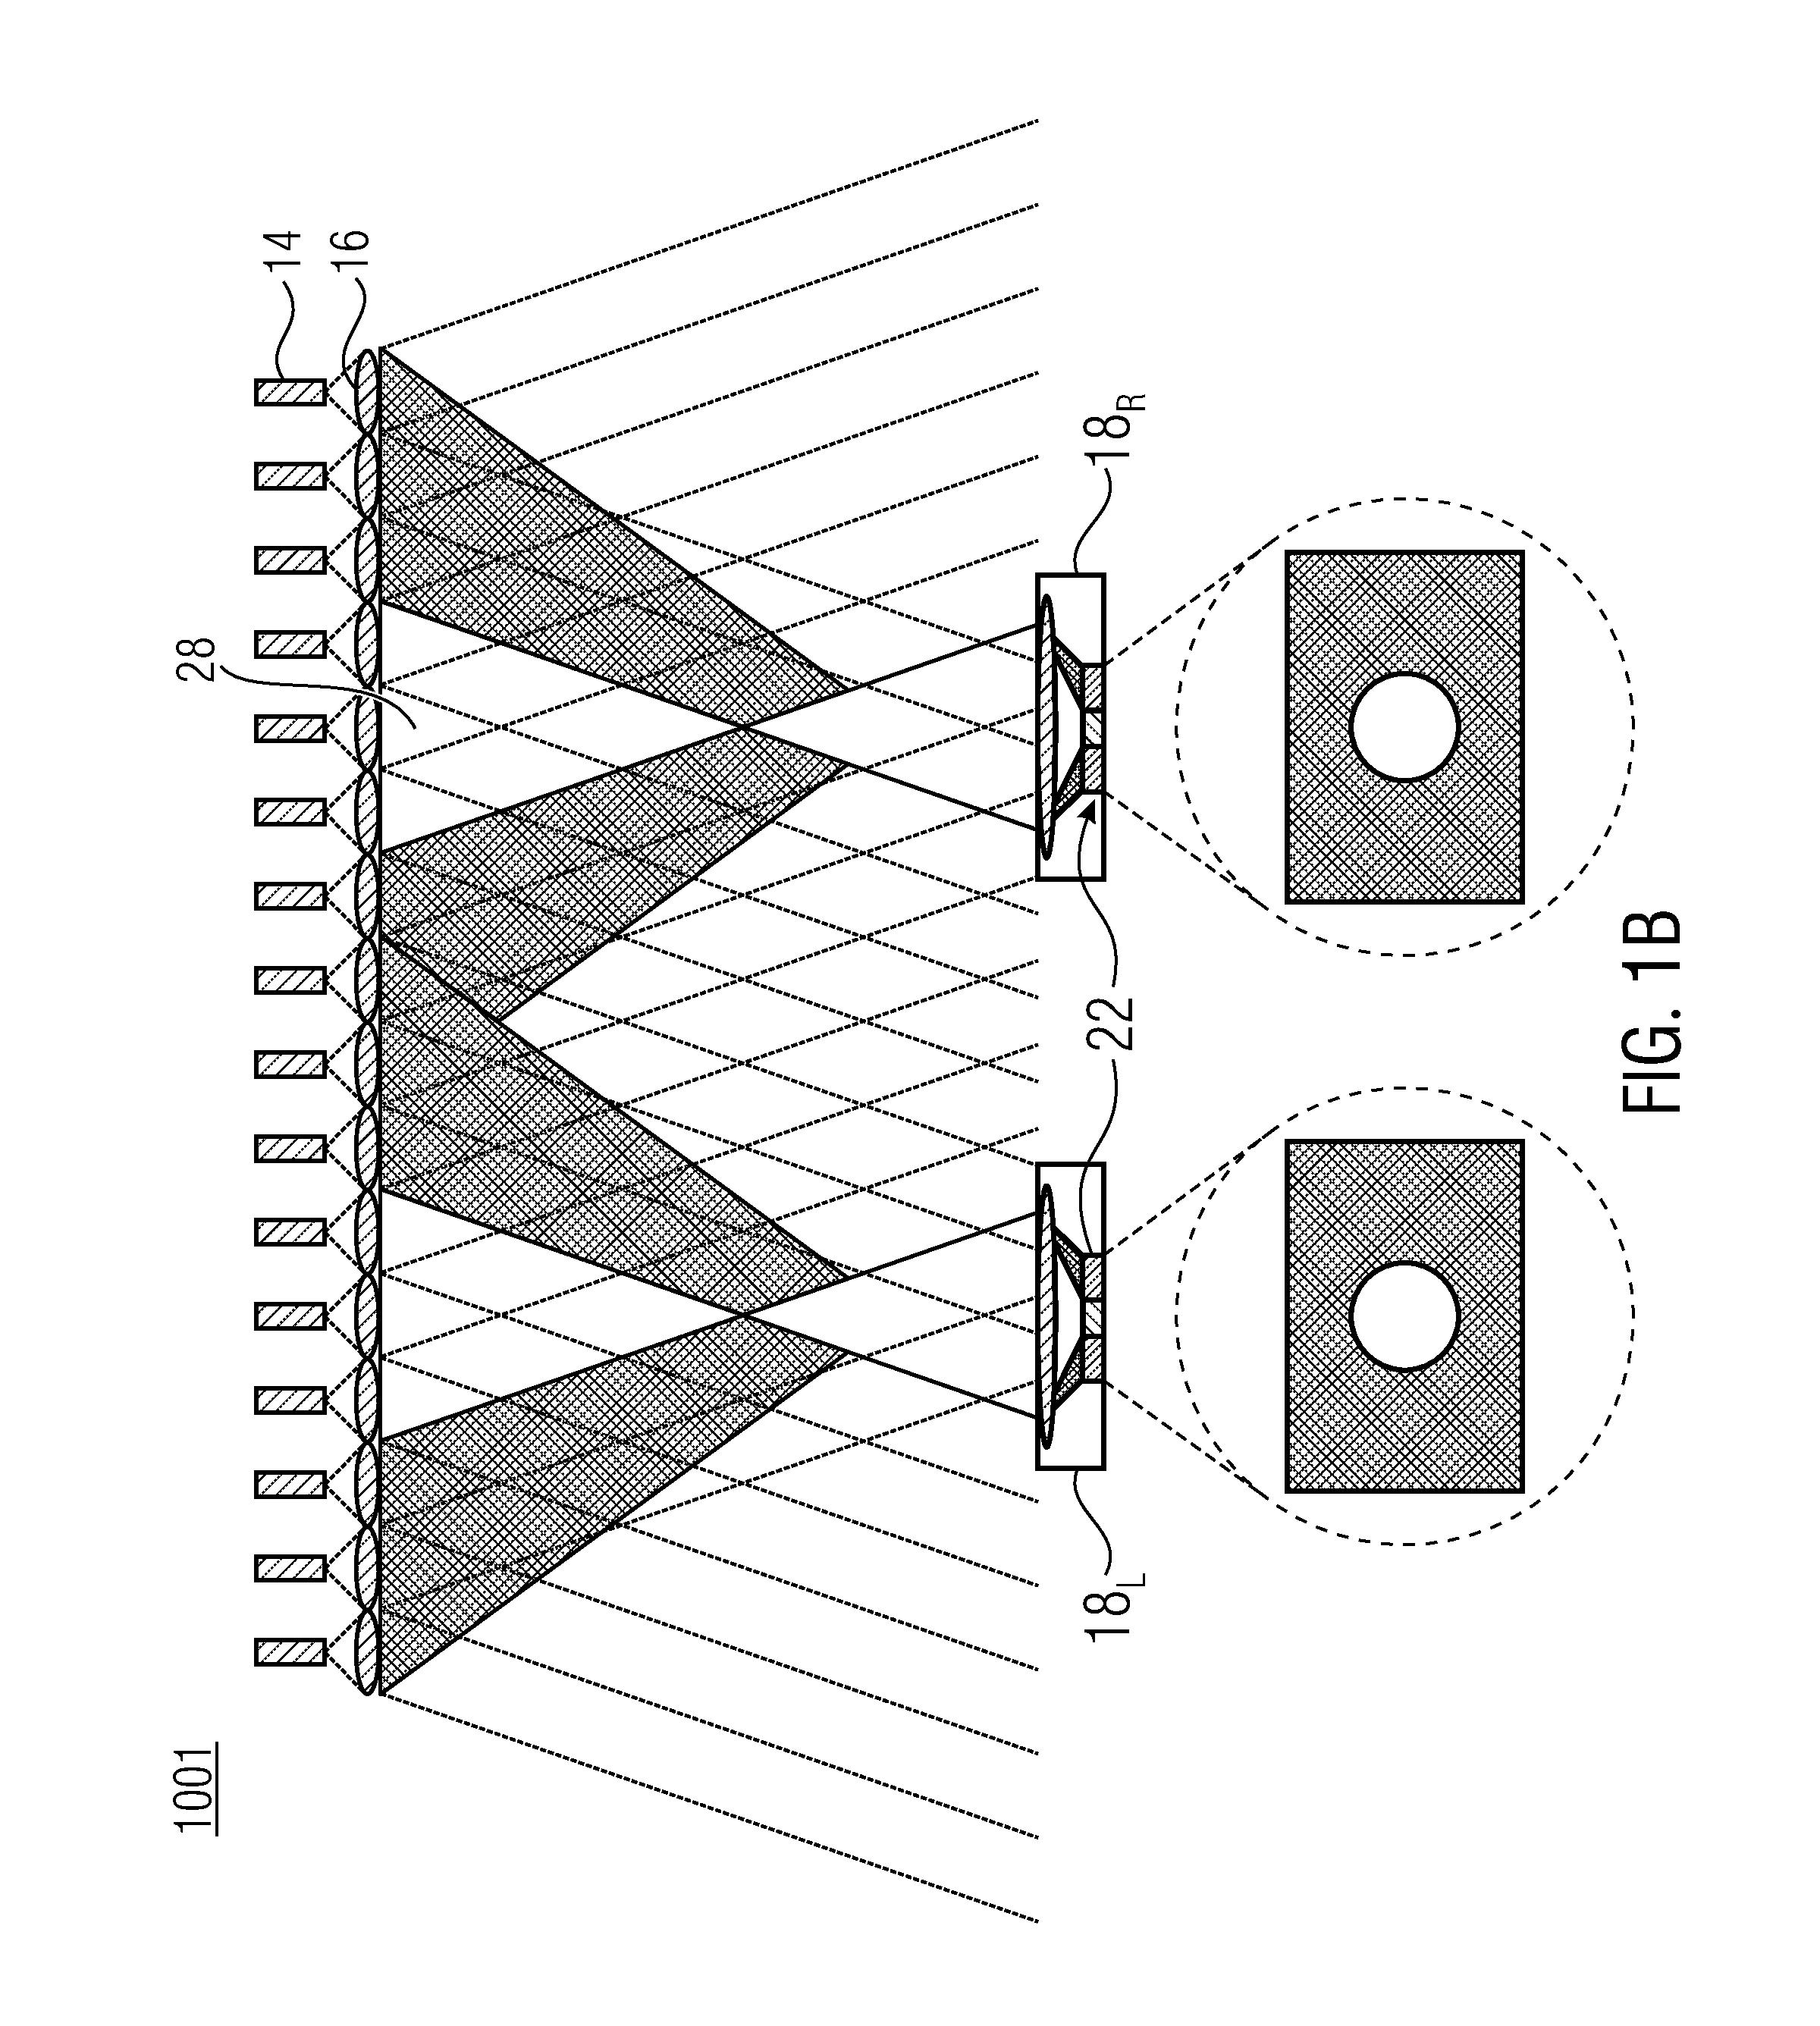 Illumination device for synthesizing light from an object at virtually infinite distance